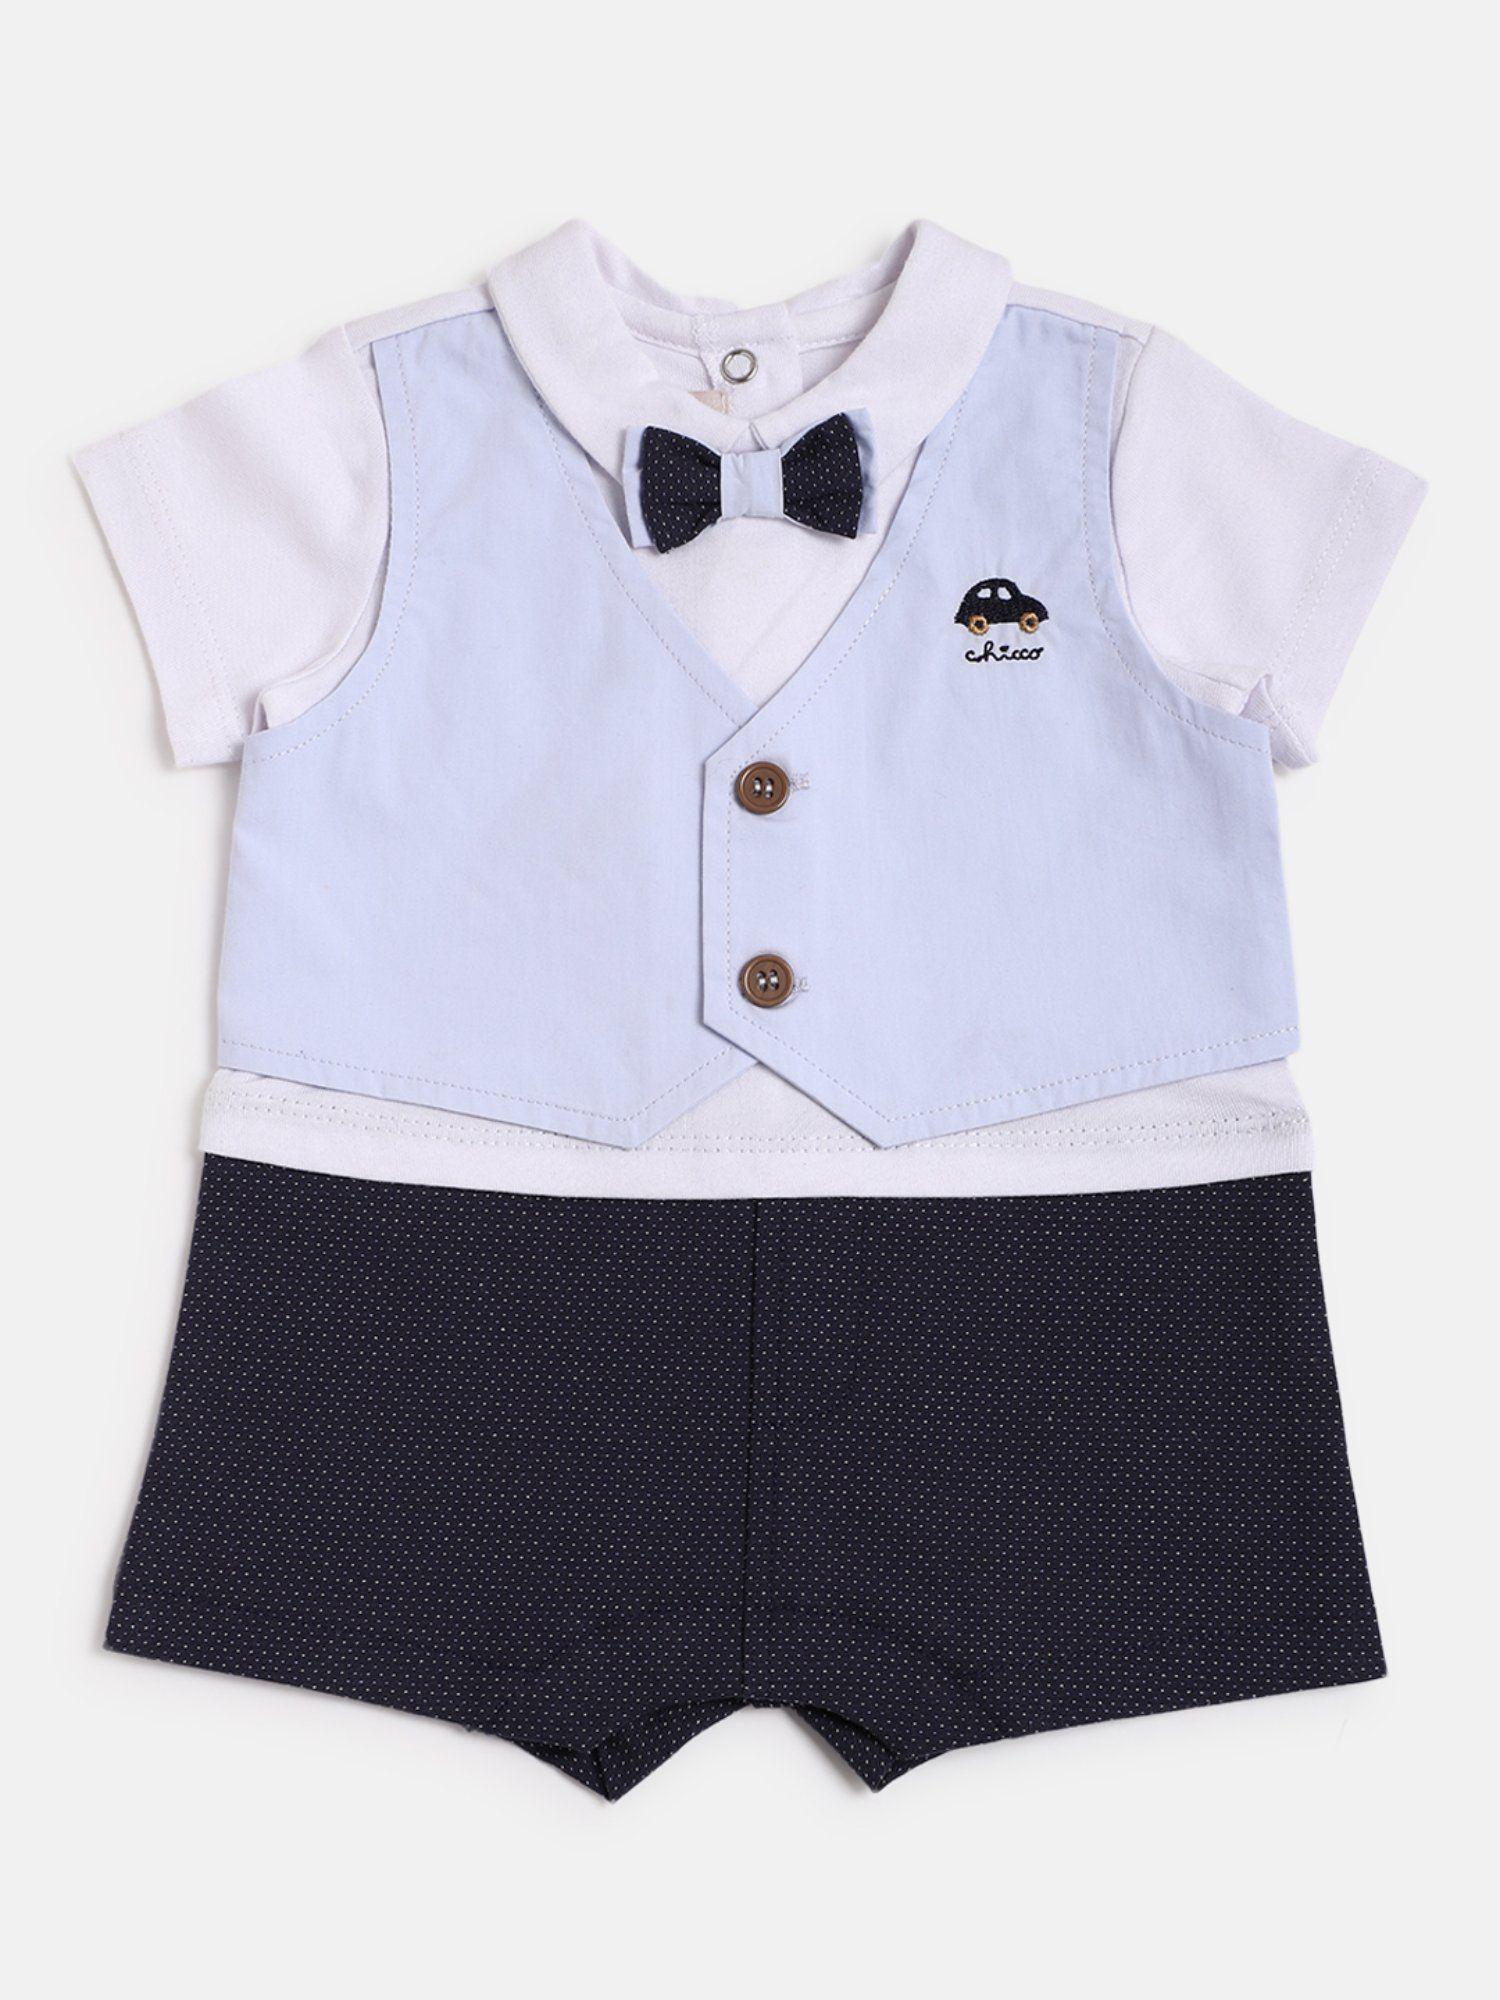 boys-multi-color-embroidered-short-sleeve-bodysuit-with-bow-tie-(set-of-2)